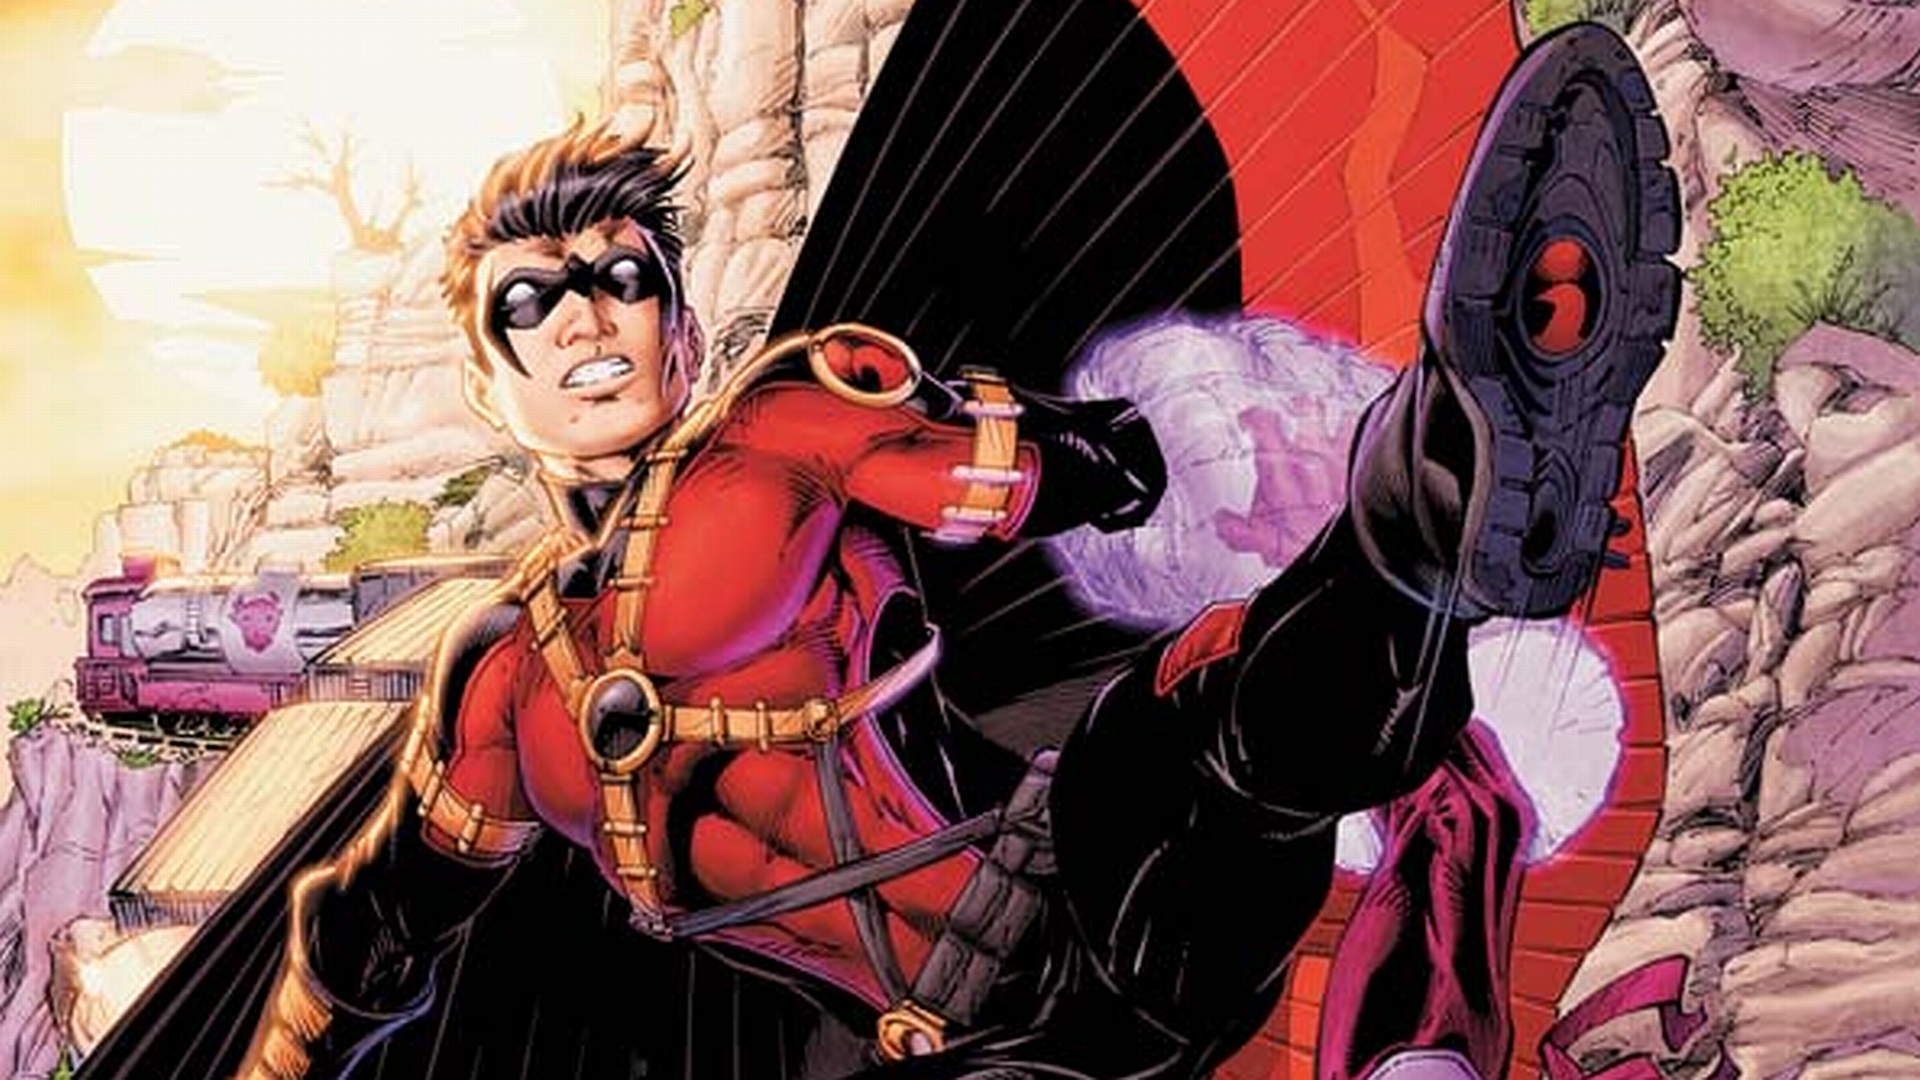 Red Robin from DC Comics' Teen Titans, depicted in The New 52 style.